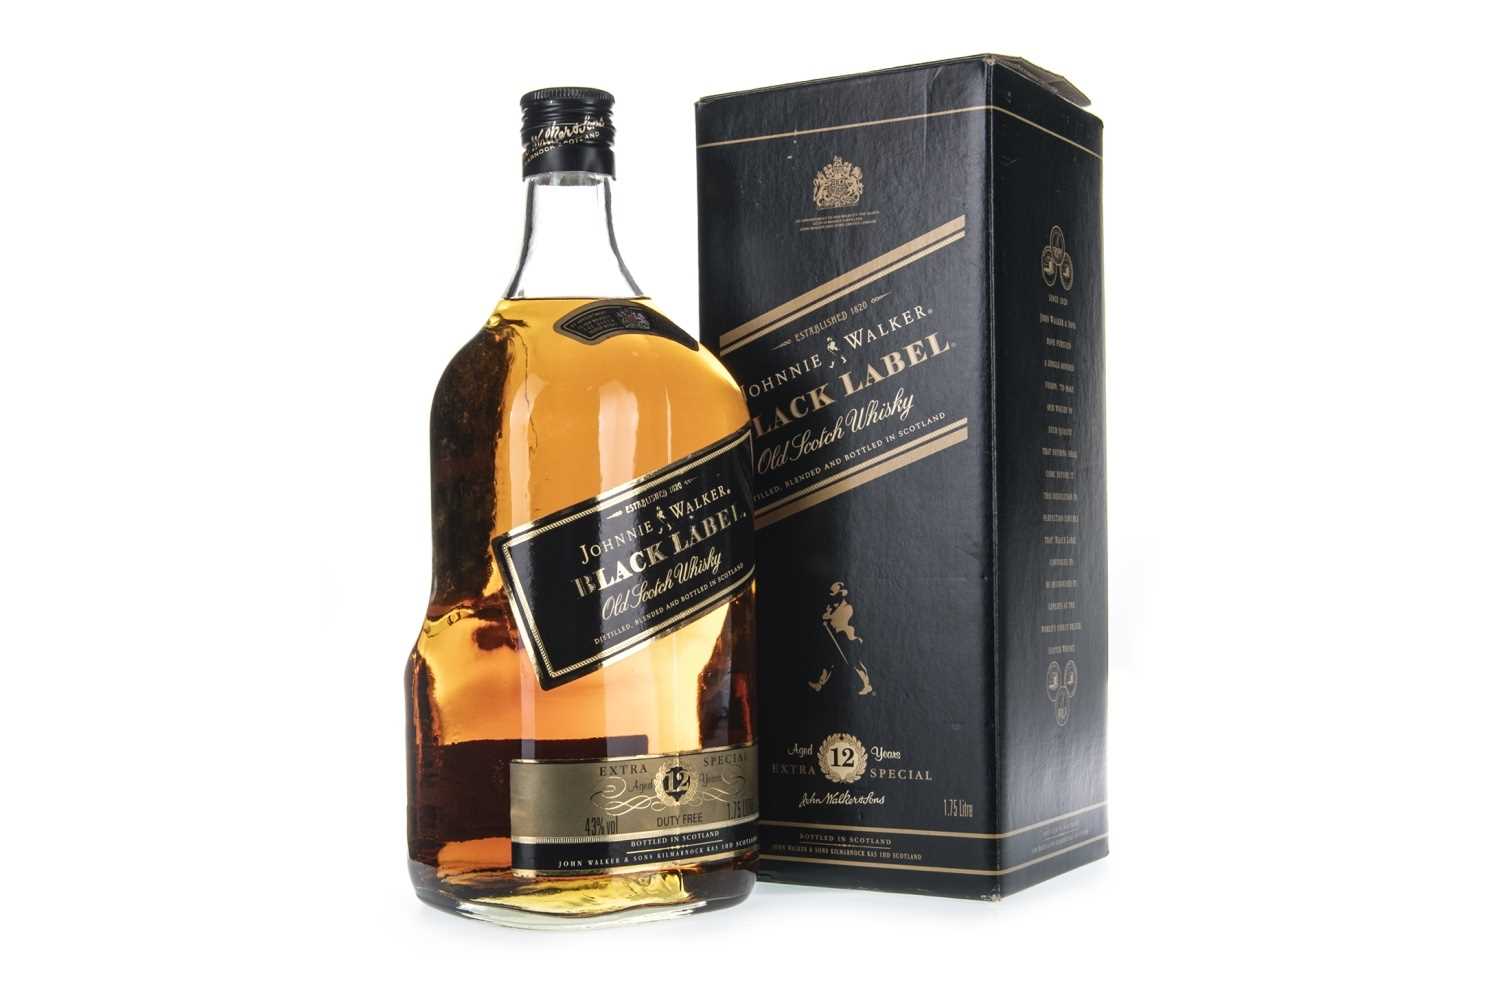 Lot 425 - JOHNNIE WALKER BLACK LABEL AGED 12 YEARS - 1.75 LITRES